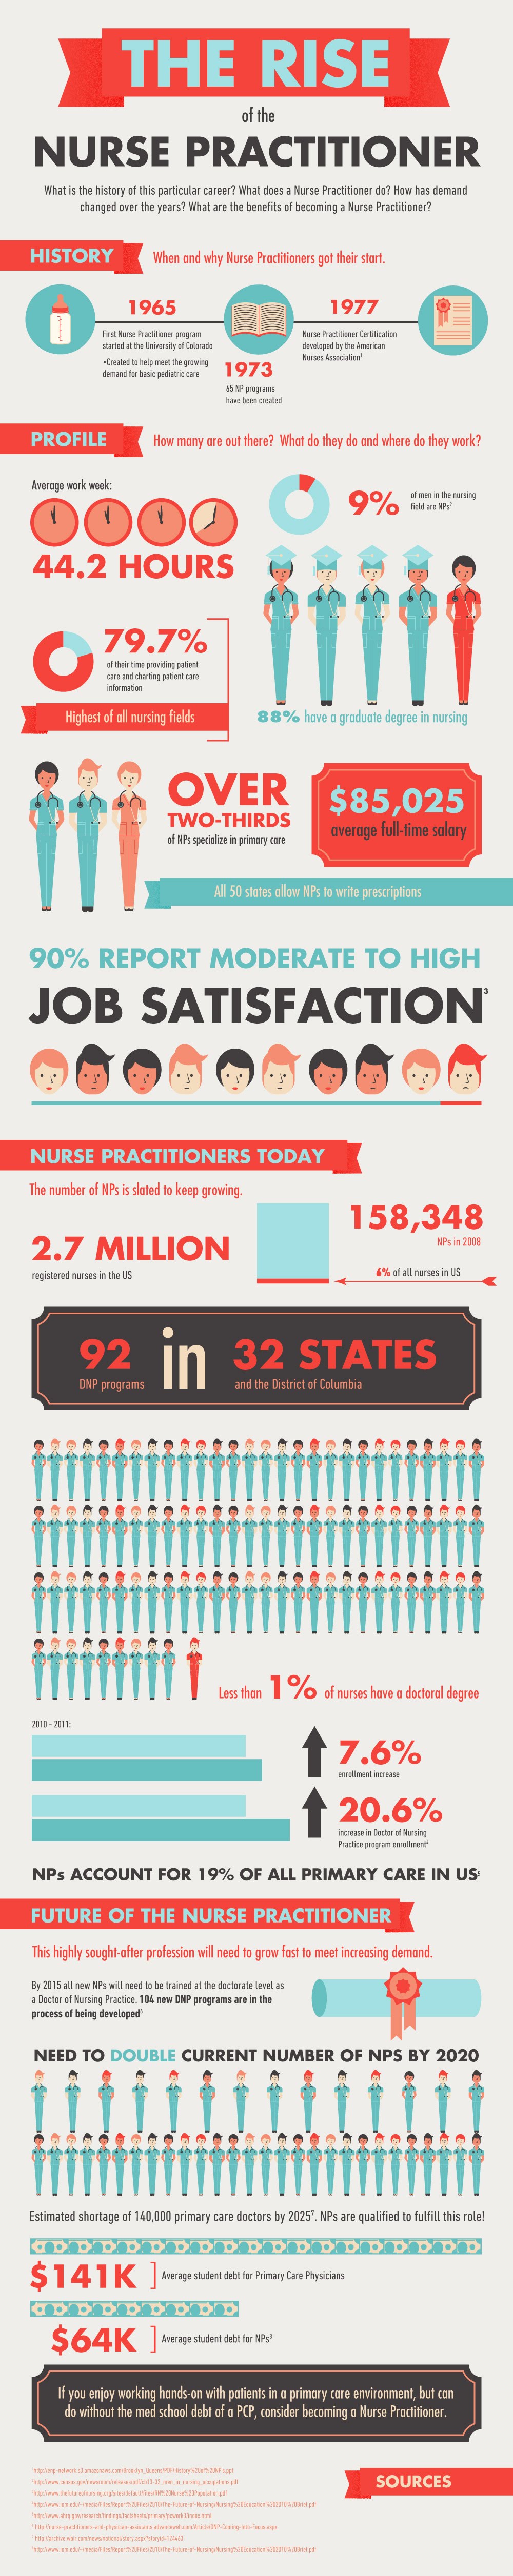 The Rise of the Nurse Practitioner #infographic